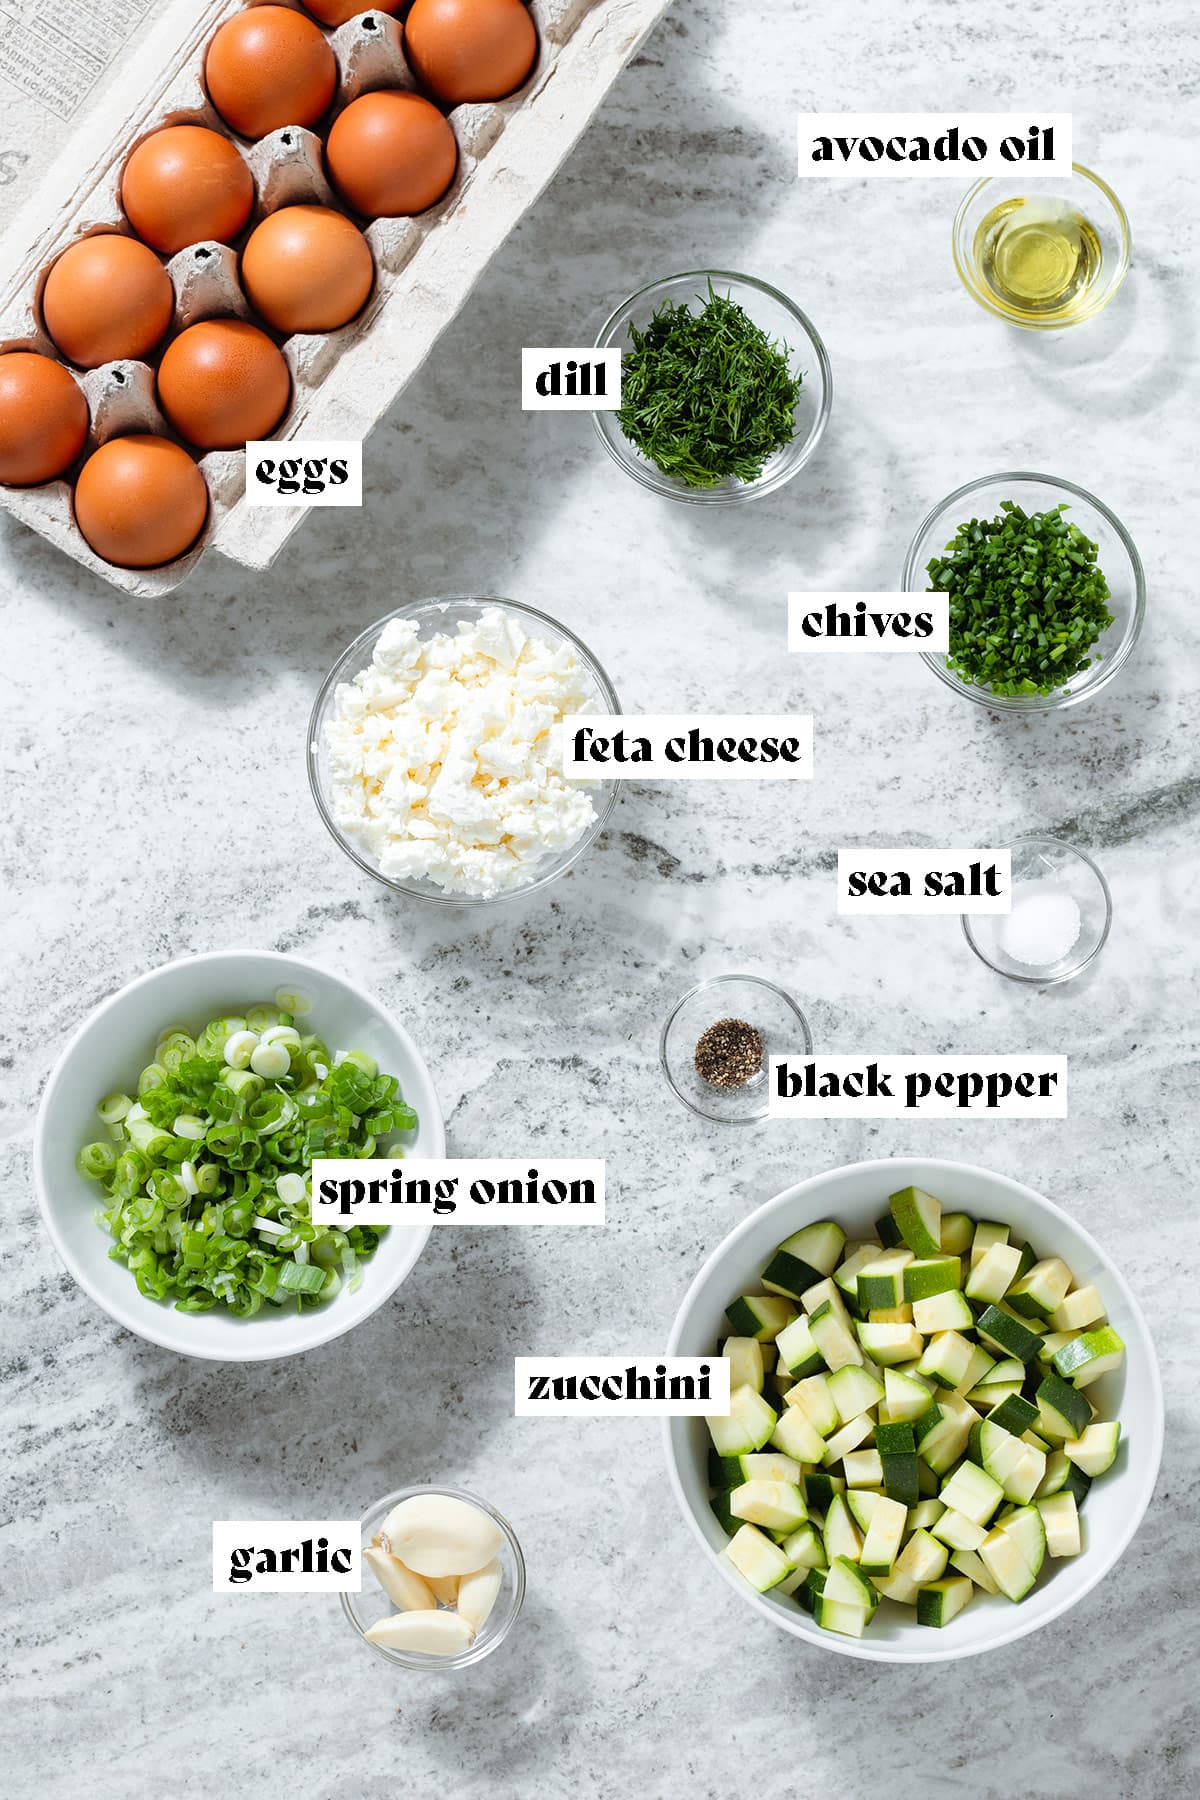 Ingredients like eggs, zucchini, spring onion, and herbs all measured and laid out in small glass bowls with text overlay.